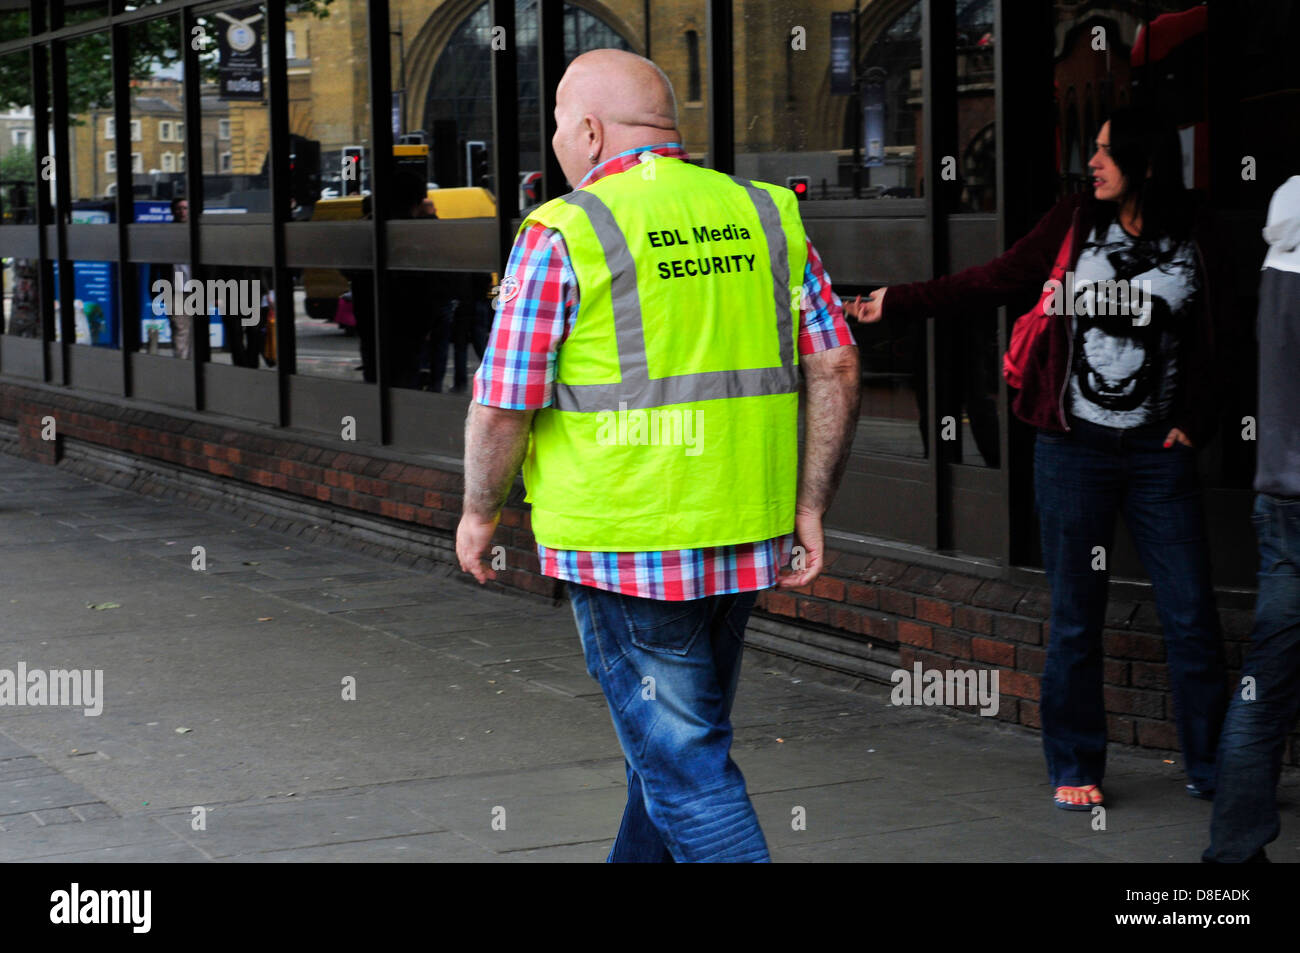 An EDL  steward at a protest in London, UK. Stock Photo